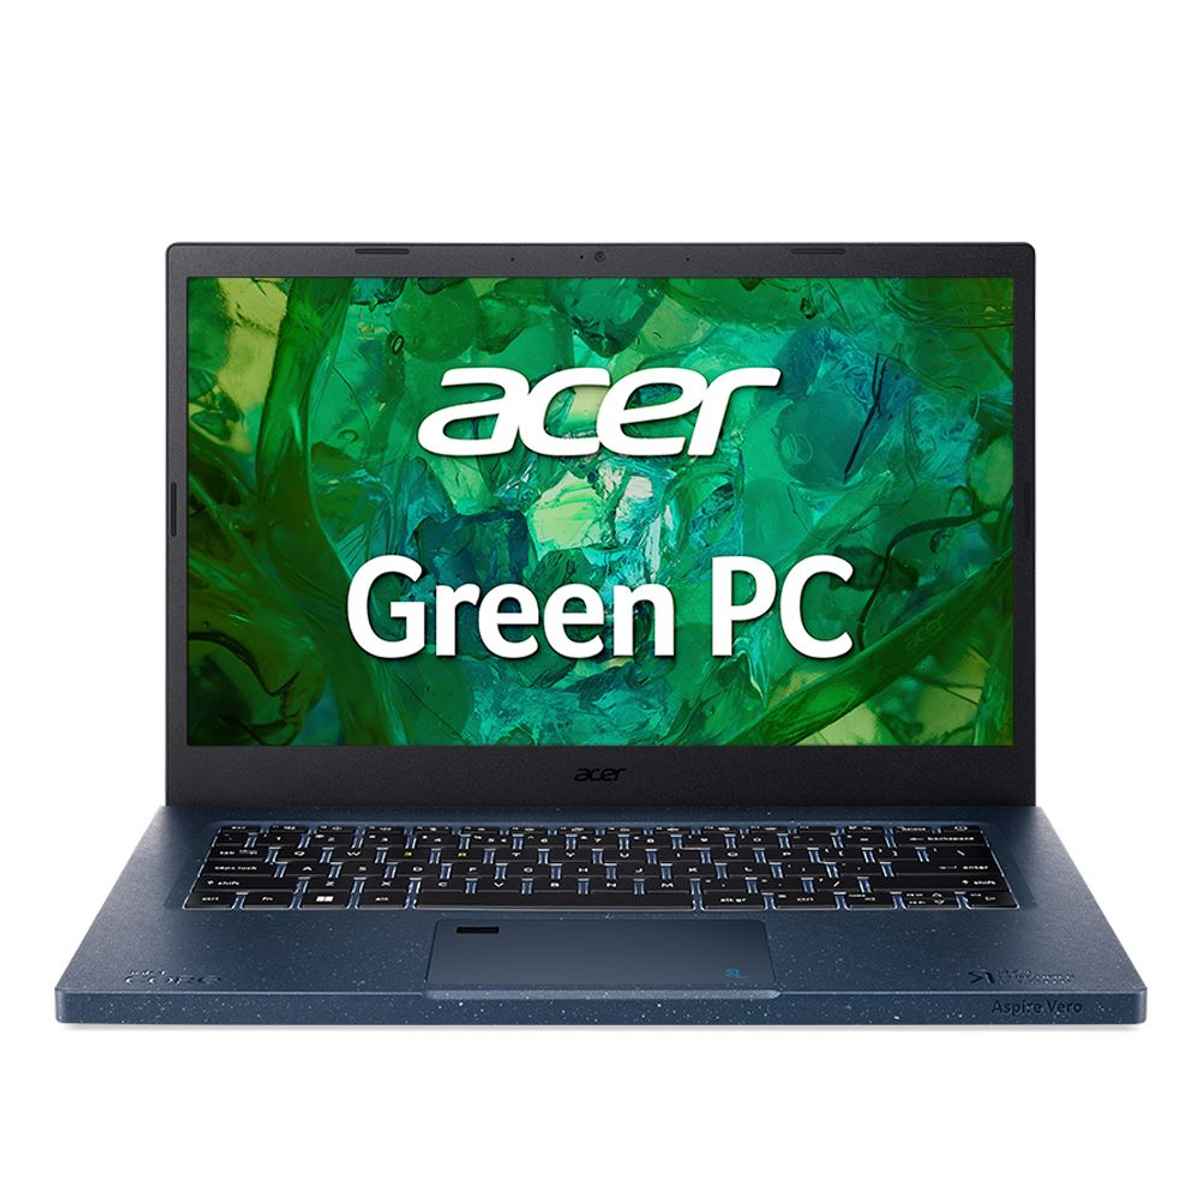 Acer Aspire Viro laptop sale lets you save not just the environment but also your money  | Digit